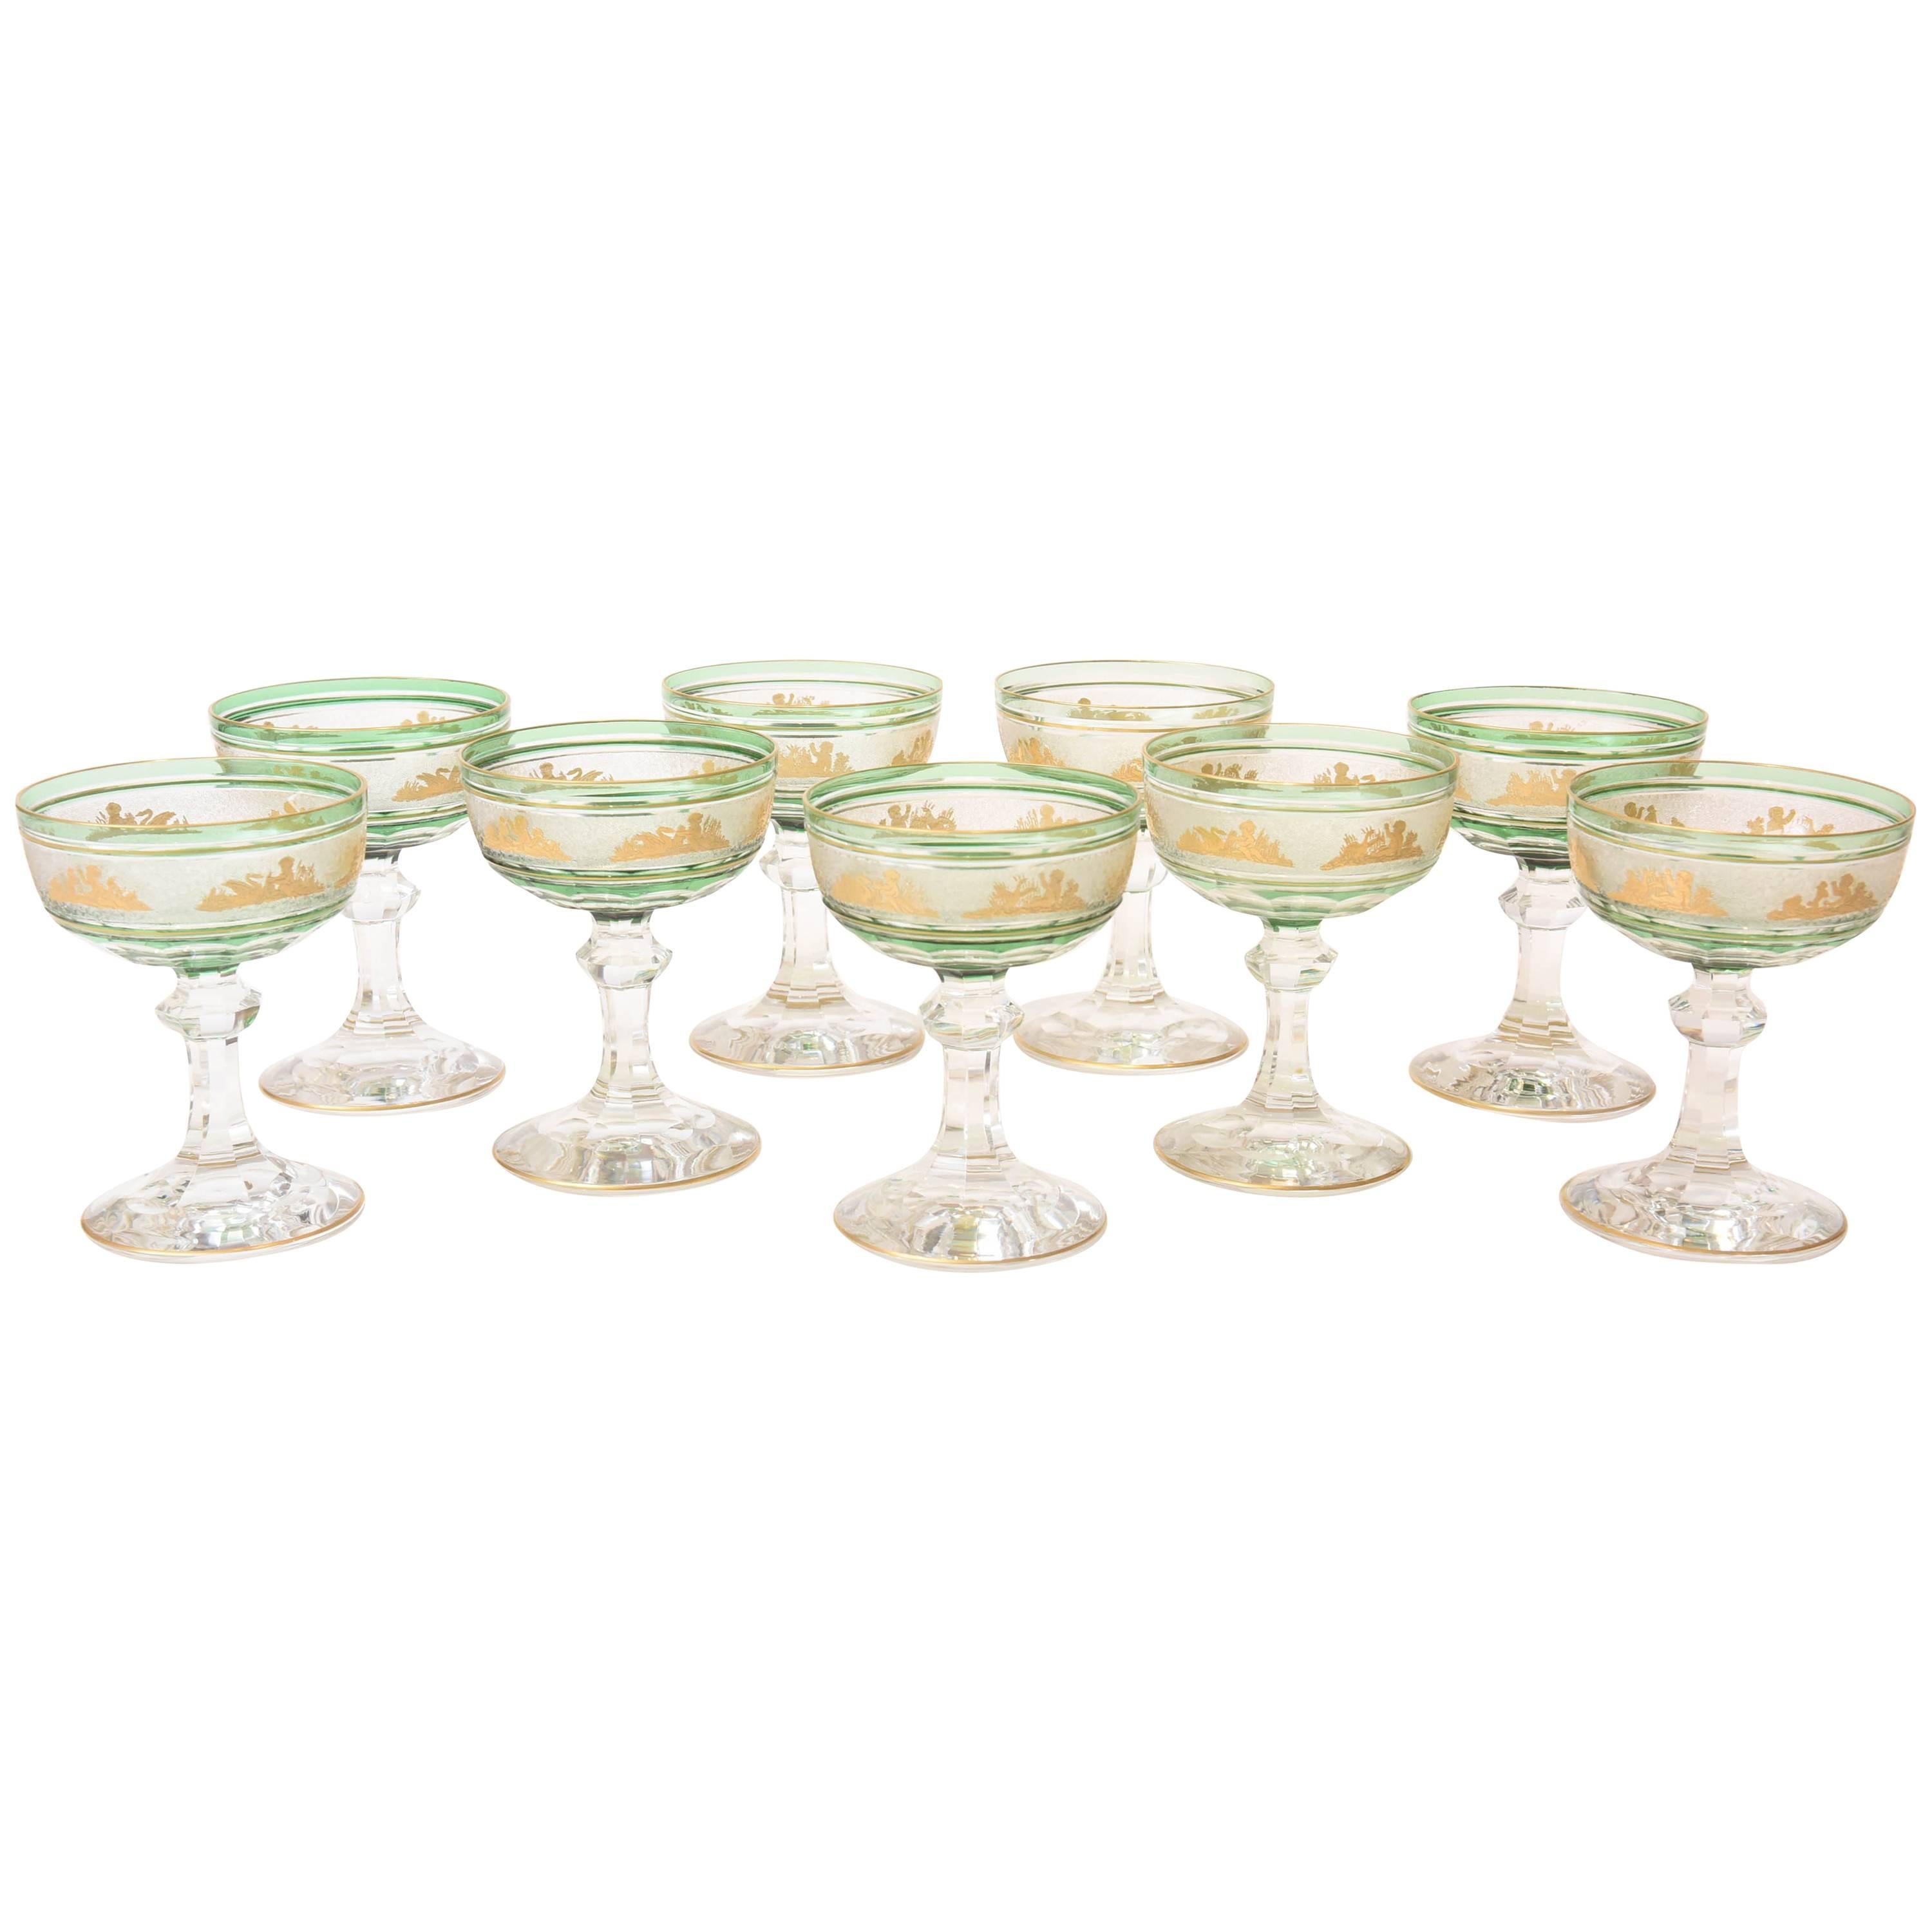 Nine Val Saint Lambert Green and Gilded Cameo Figure Champagne Coupes